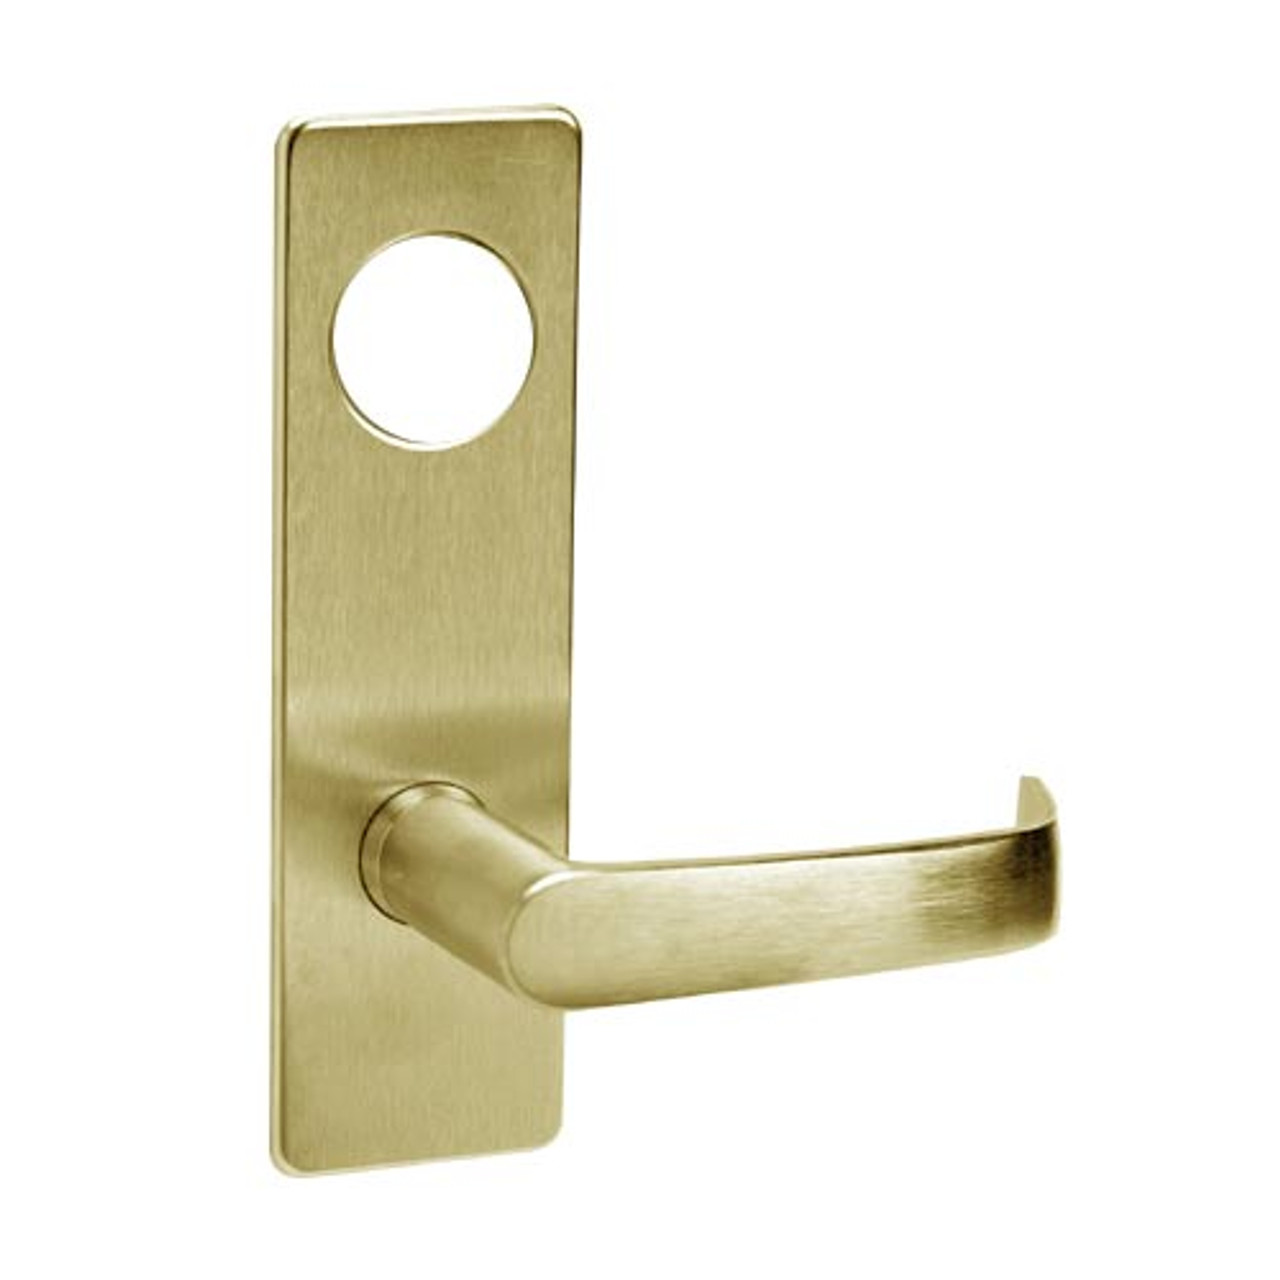 ML2022-NSR-606-CL7 Corbin Russwin ML2000 Series IC 7-Pin Less Core Mortise Store Door Locksets with Newport Lever with Deadbolt in Satin Brass